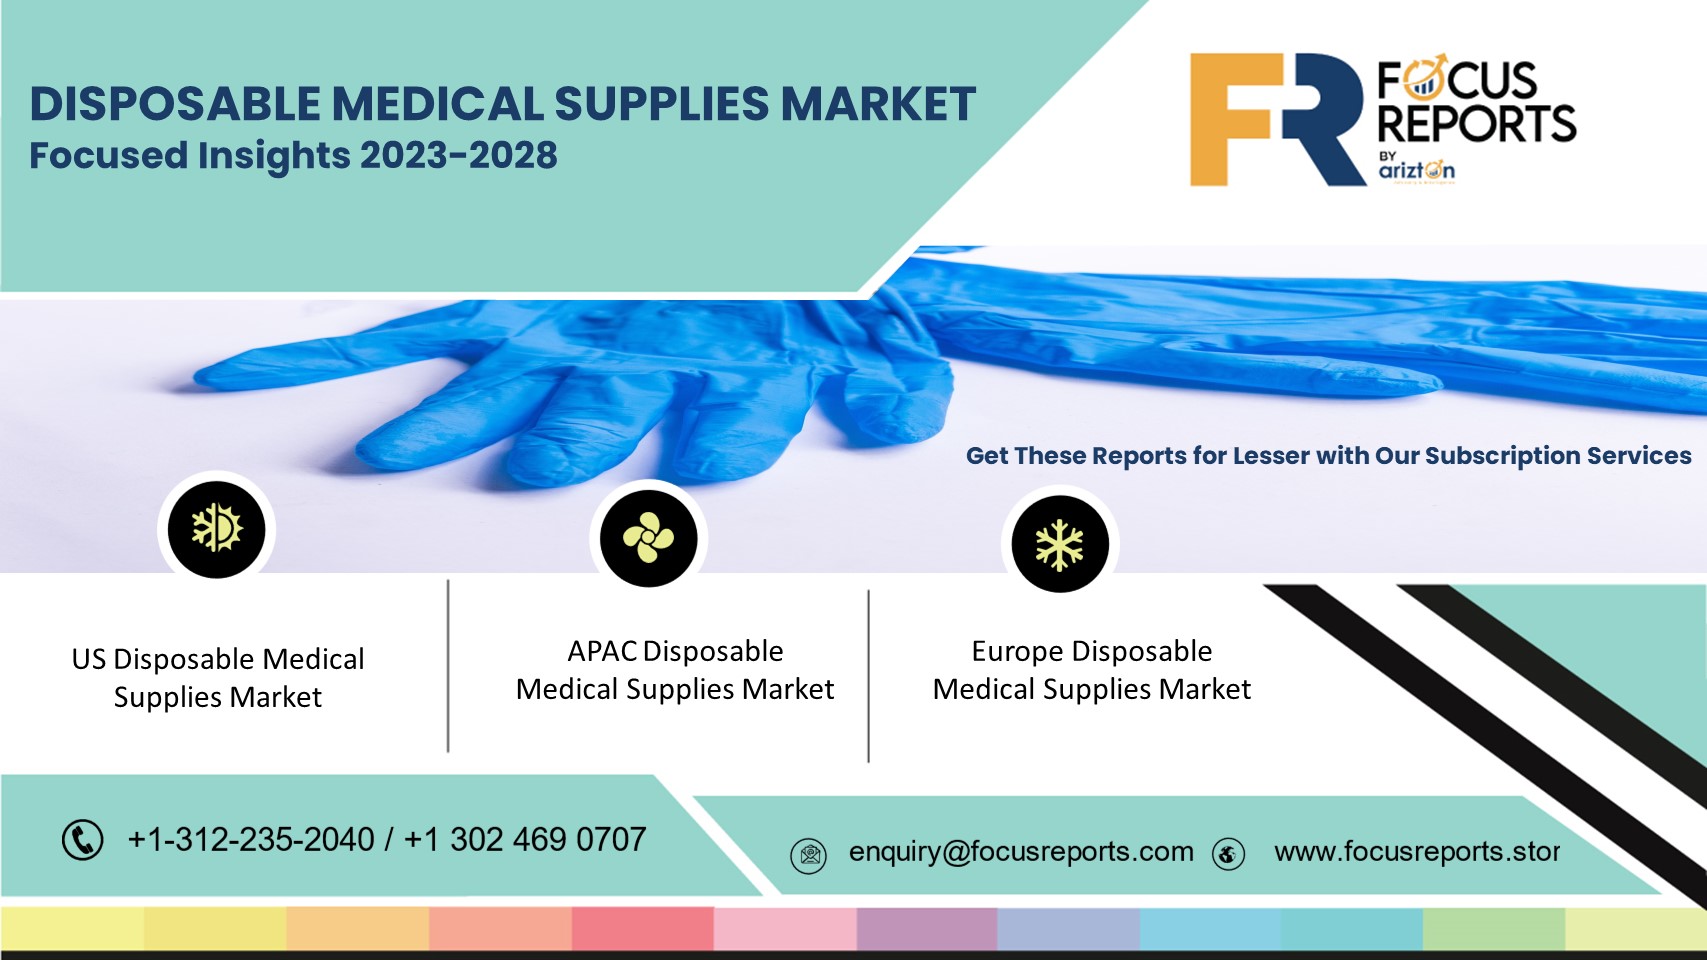 Disposable Medical Supplies Market to Boom Across APAC, the US, & Europe; Multi-Billion Opportunities in the Next 6 Years - Arizton 